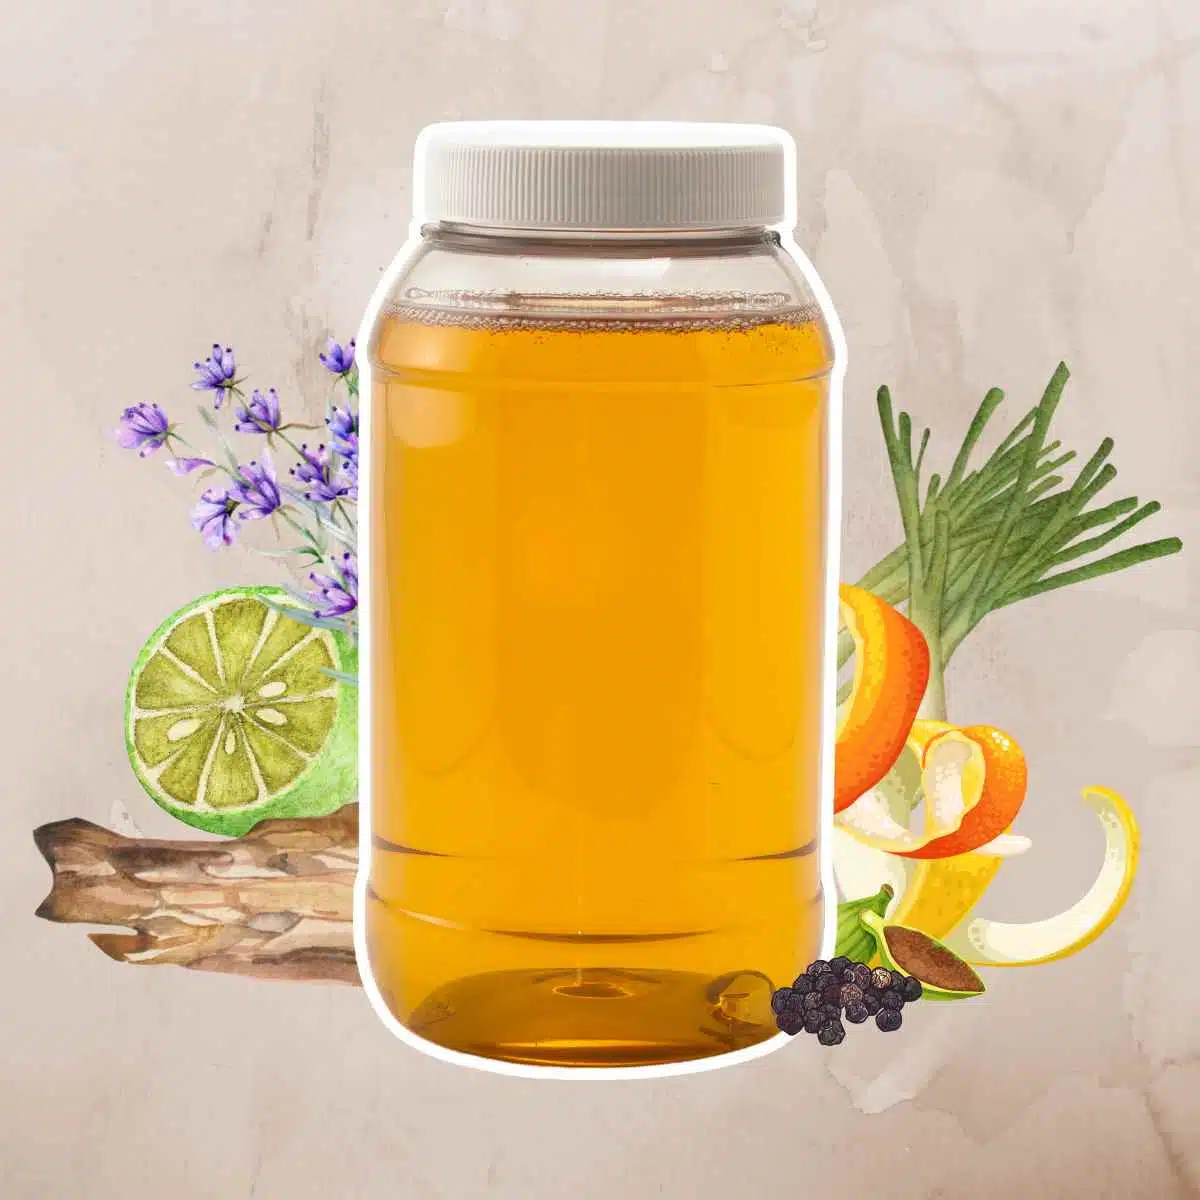 Jar of Homemade Tonic syrup with ingredients in the background